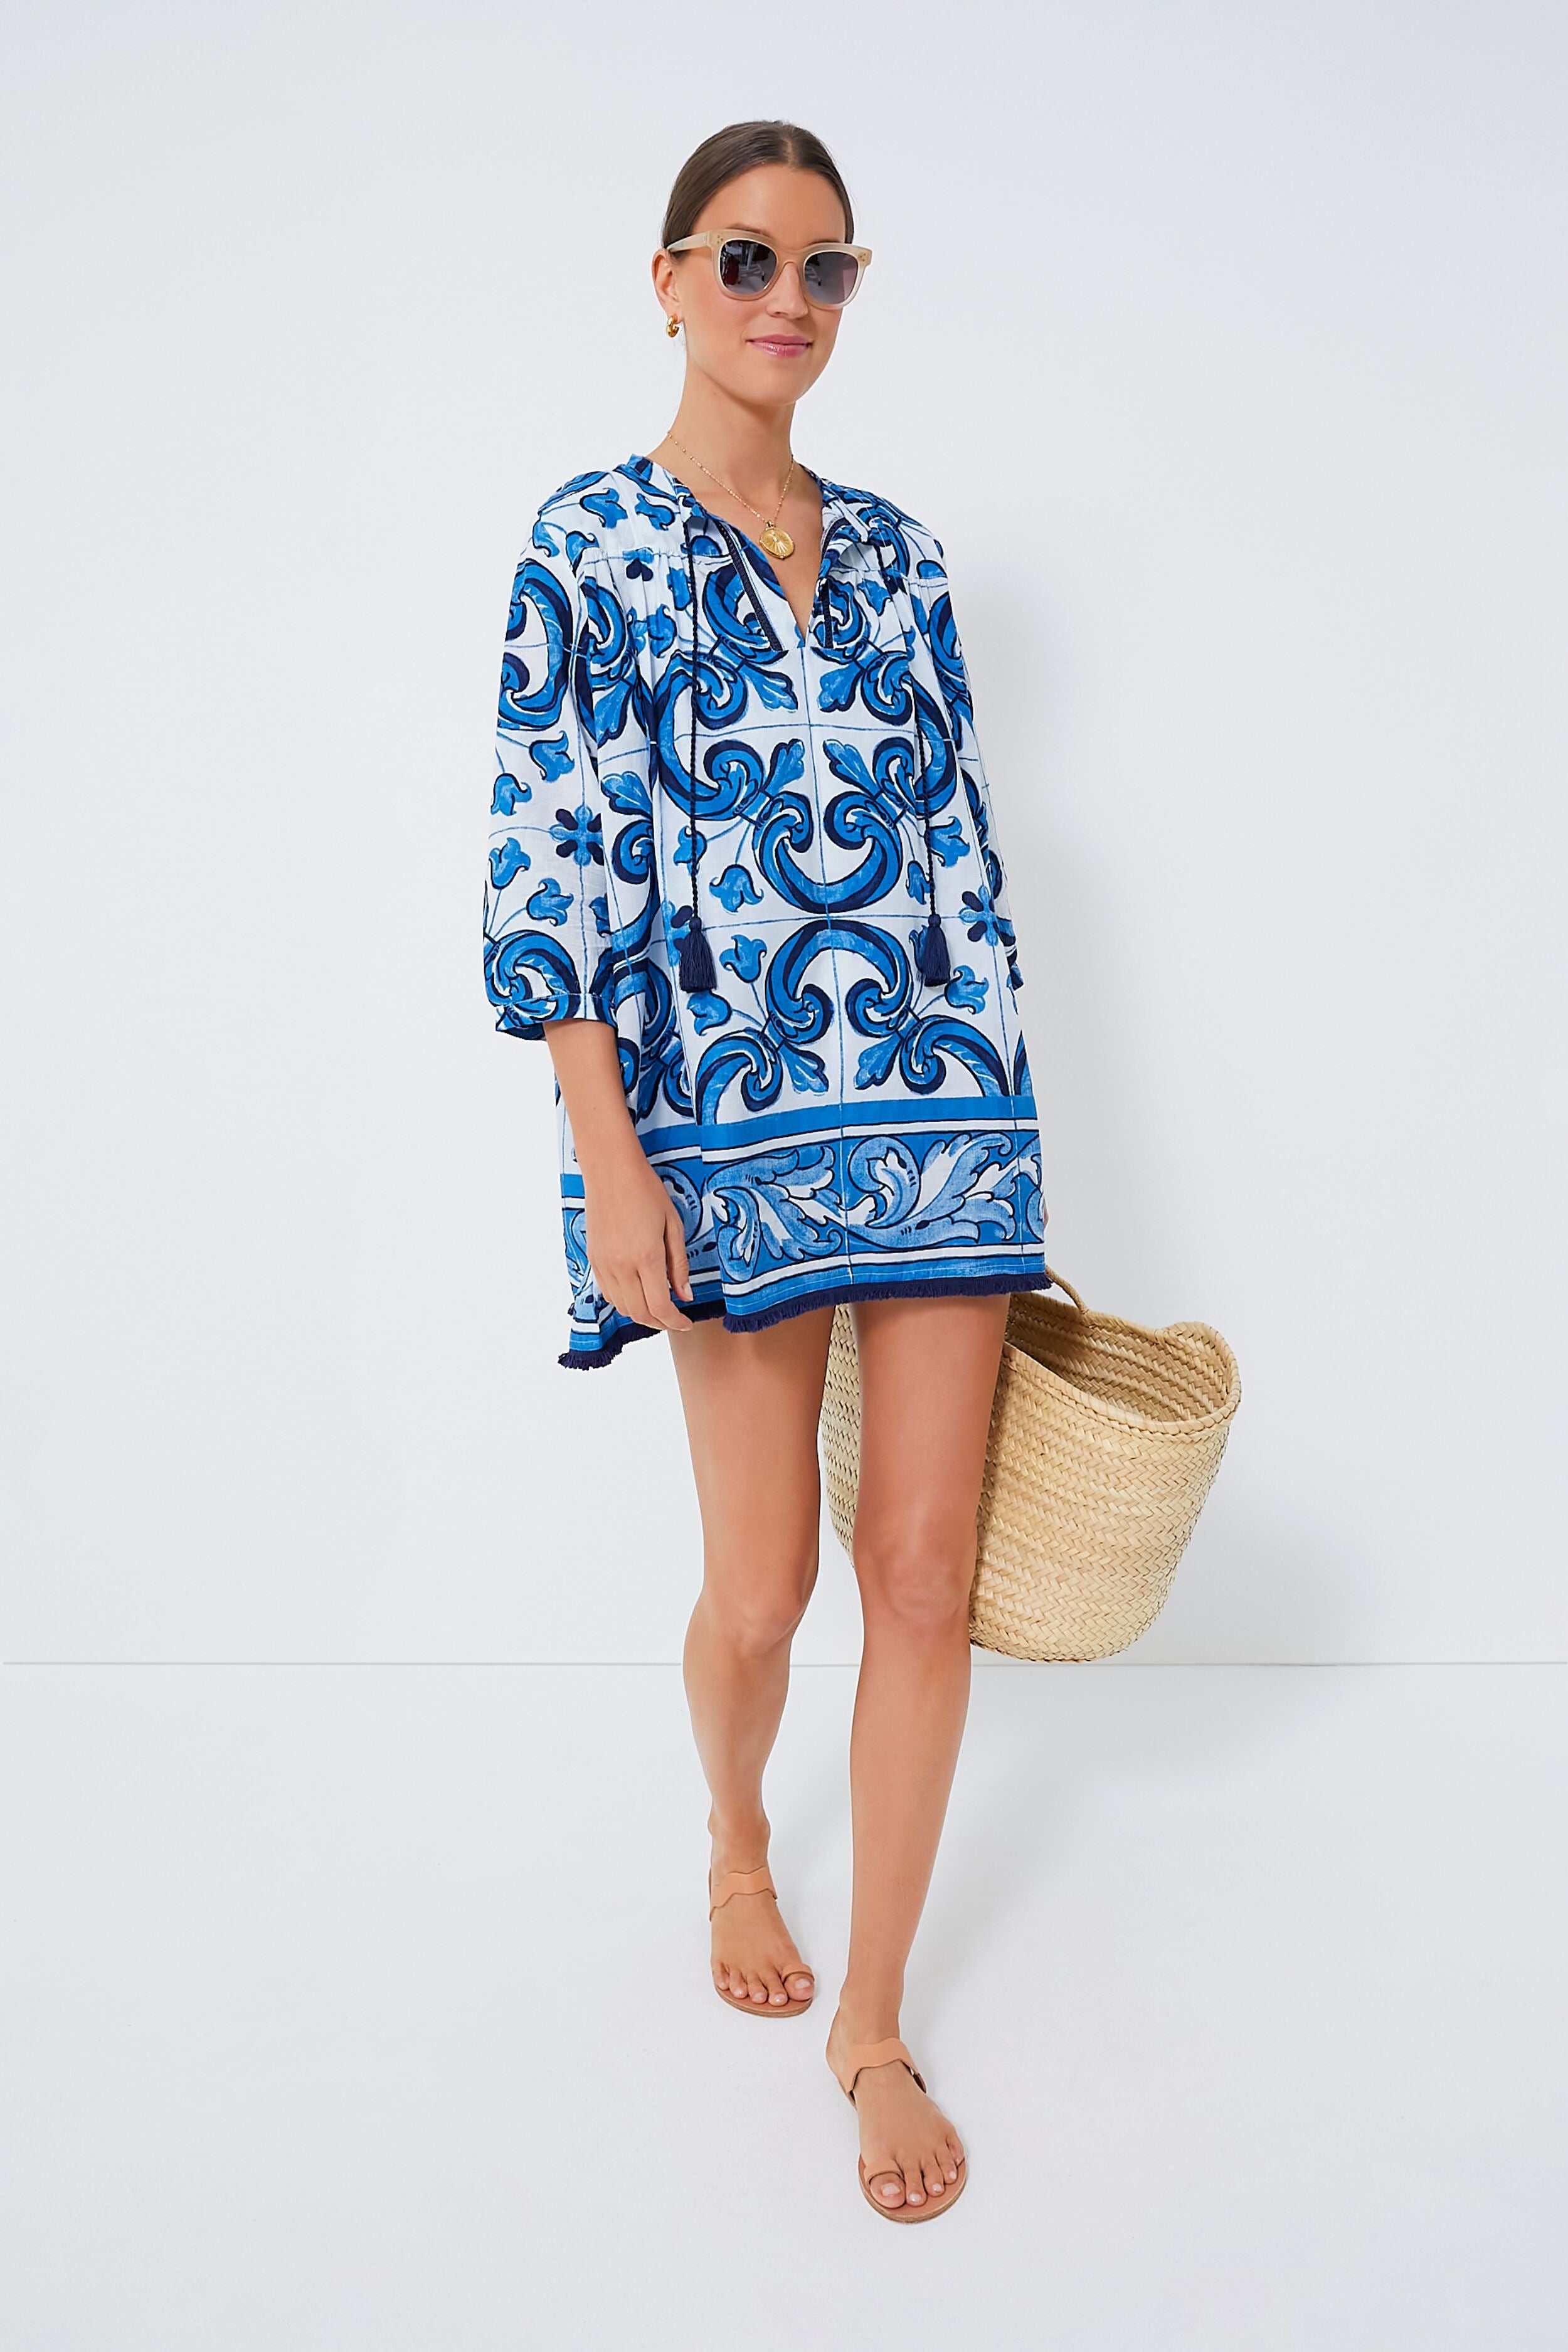 Embroidered Beach Cover Up/Tunic With Neckline Tassel Ties